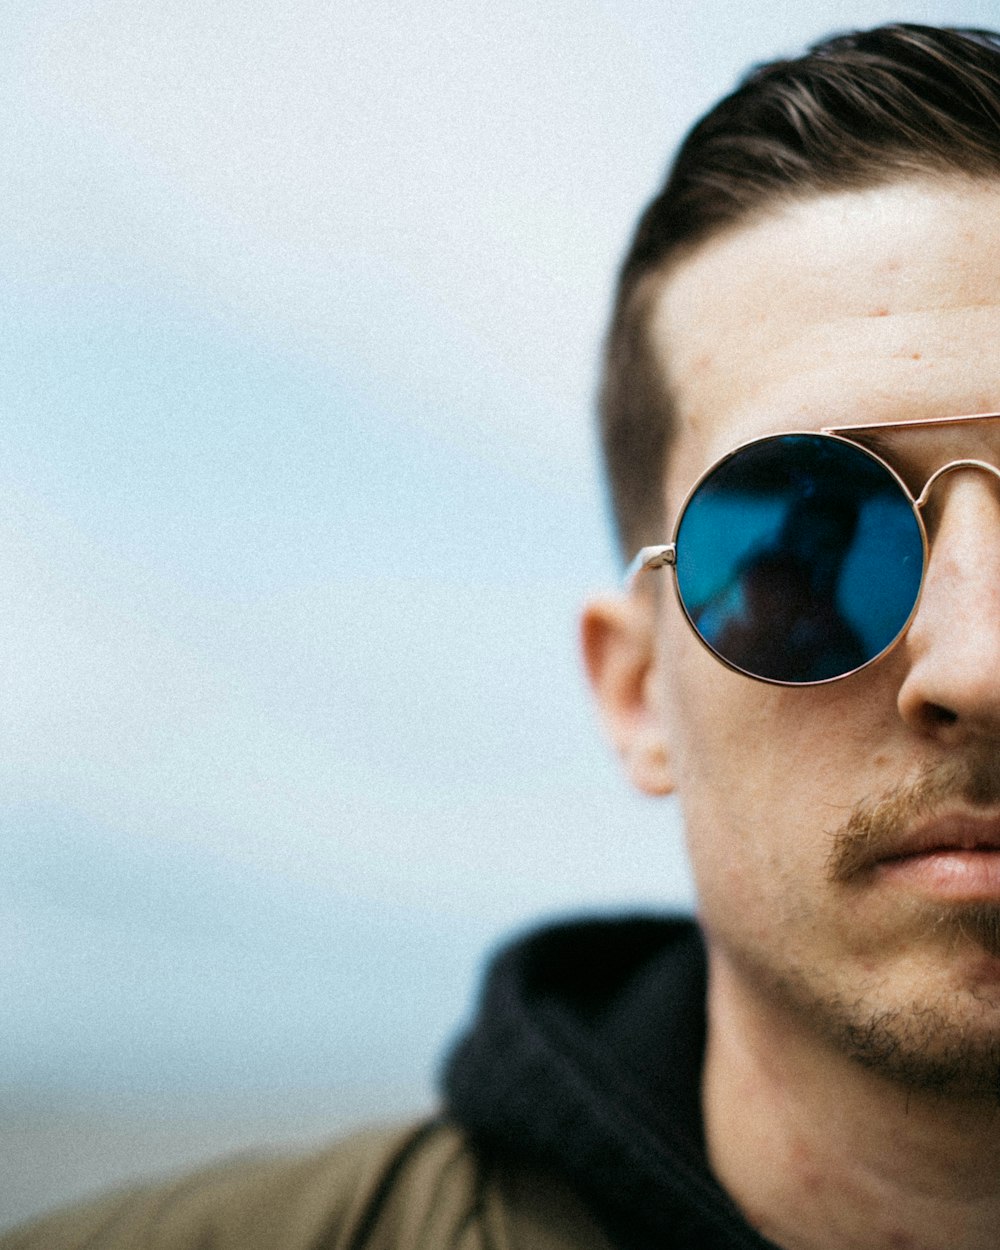 man wearing gold-framed sunglasses with blue lens